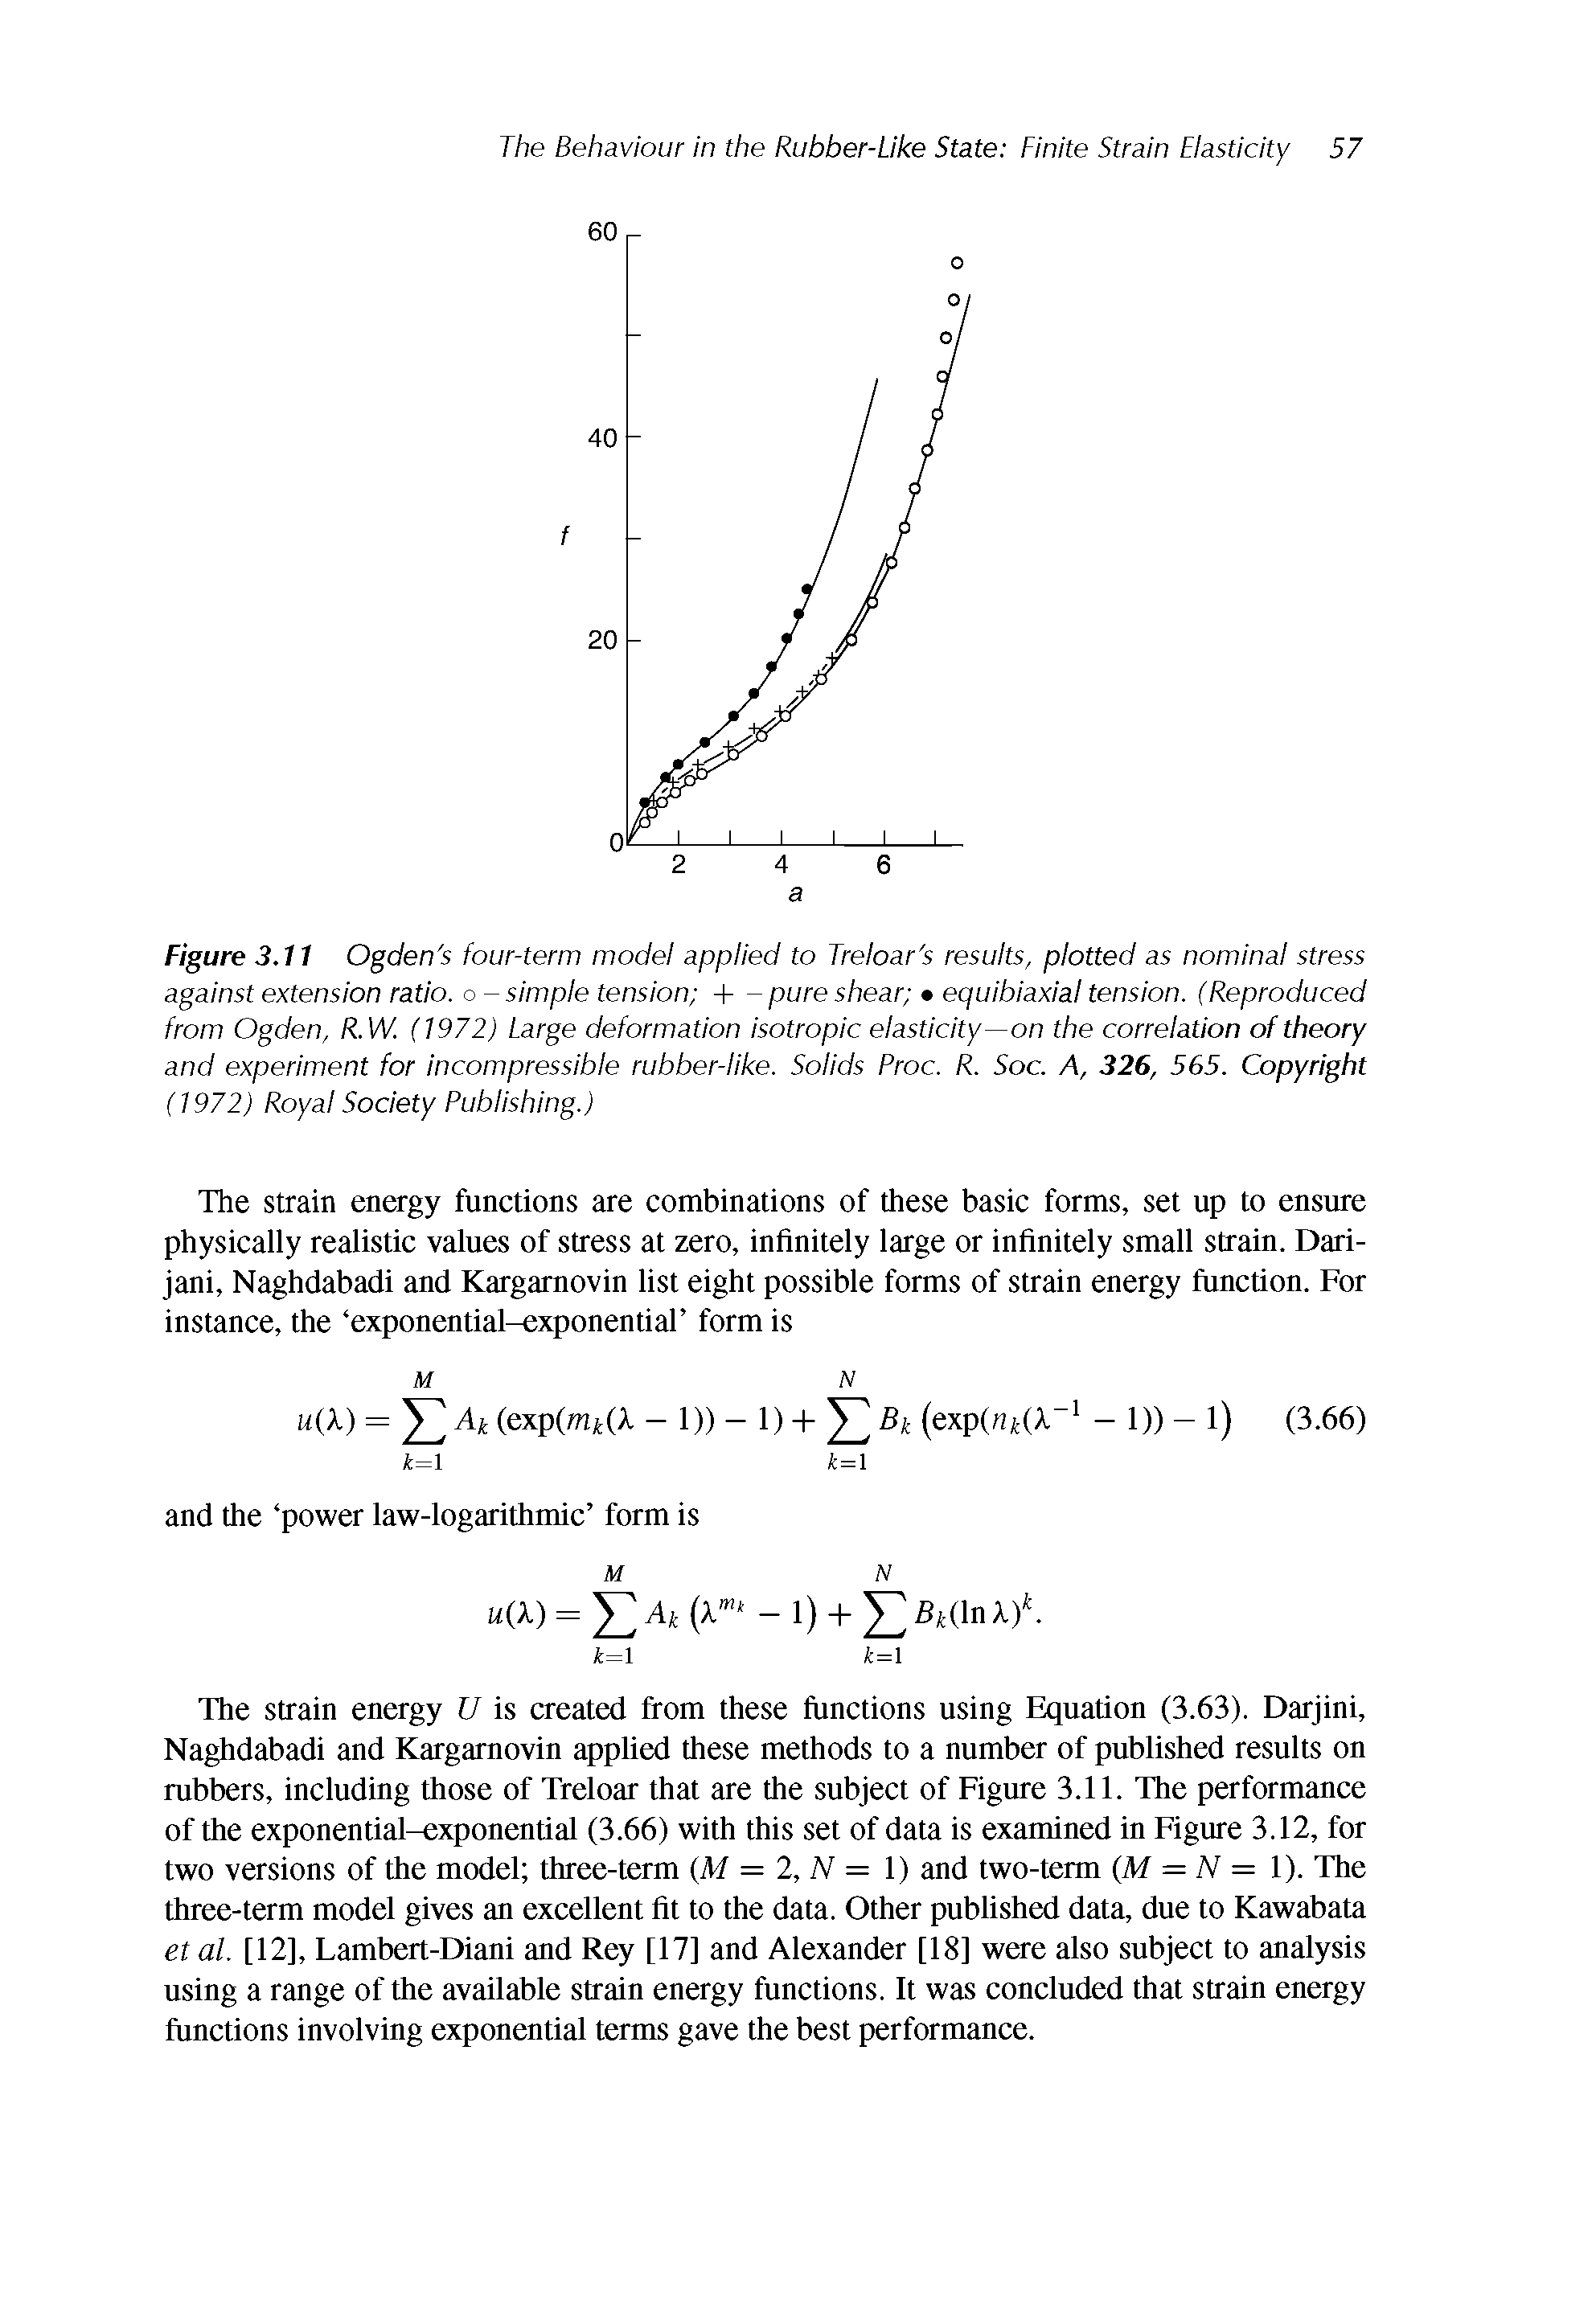 Figure 3.11 Ogden s four-term model applied to Treloar s results, plotted as nominal stress against extension ratio, o - simple tension H— pure shear equibiaxial tension. (Reproduced from Ogden, R.W. (1972) Large deformation isotropic elasticity—on the correlation of theory and experiment for incompressible rubber-like. Solids Proc. R. Soc. A, 326, 565. Copyright (1972) Royal Society Publishing.)...